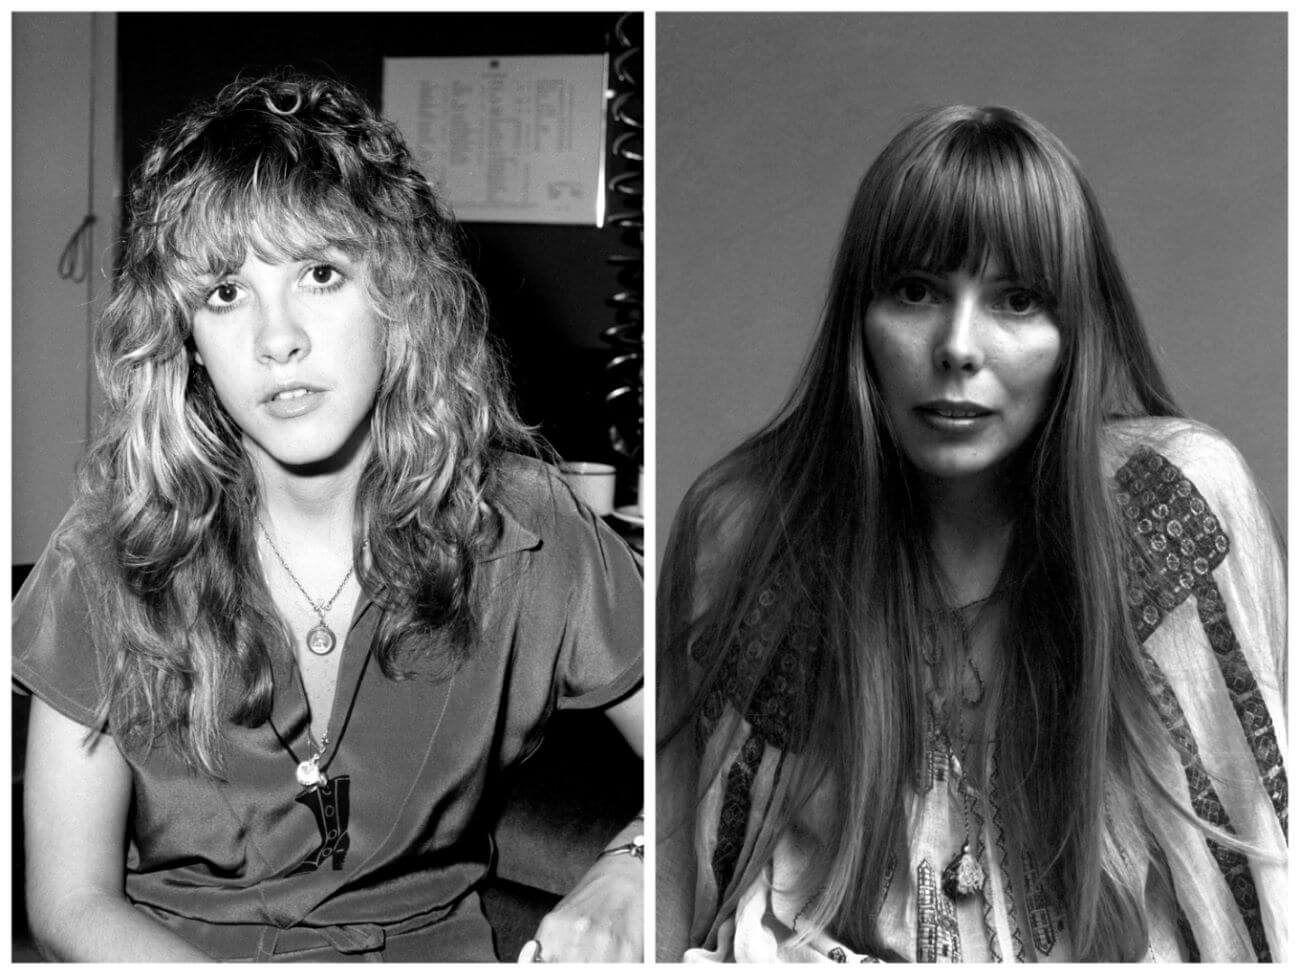 A black and white picture of Stevie Nicks wearing a short sleeved shirt and a necklace. Joni Mitchell wears a long sleeved shirt.